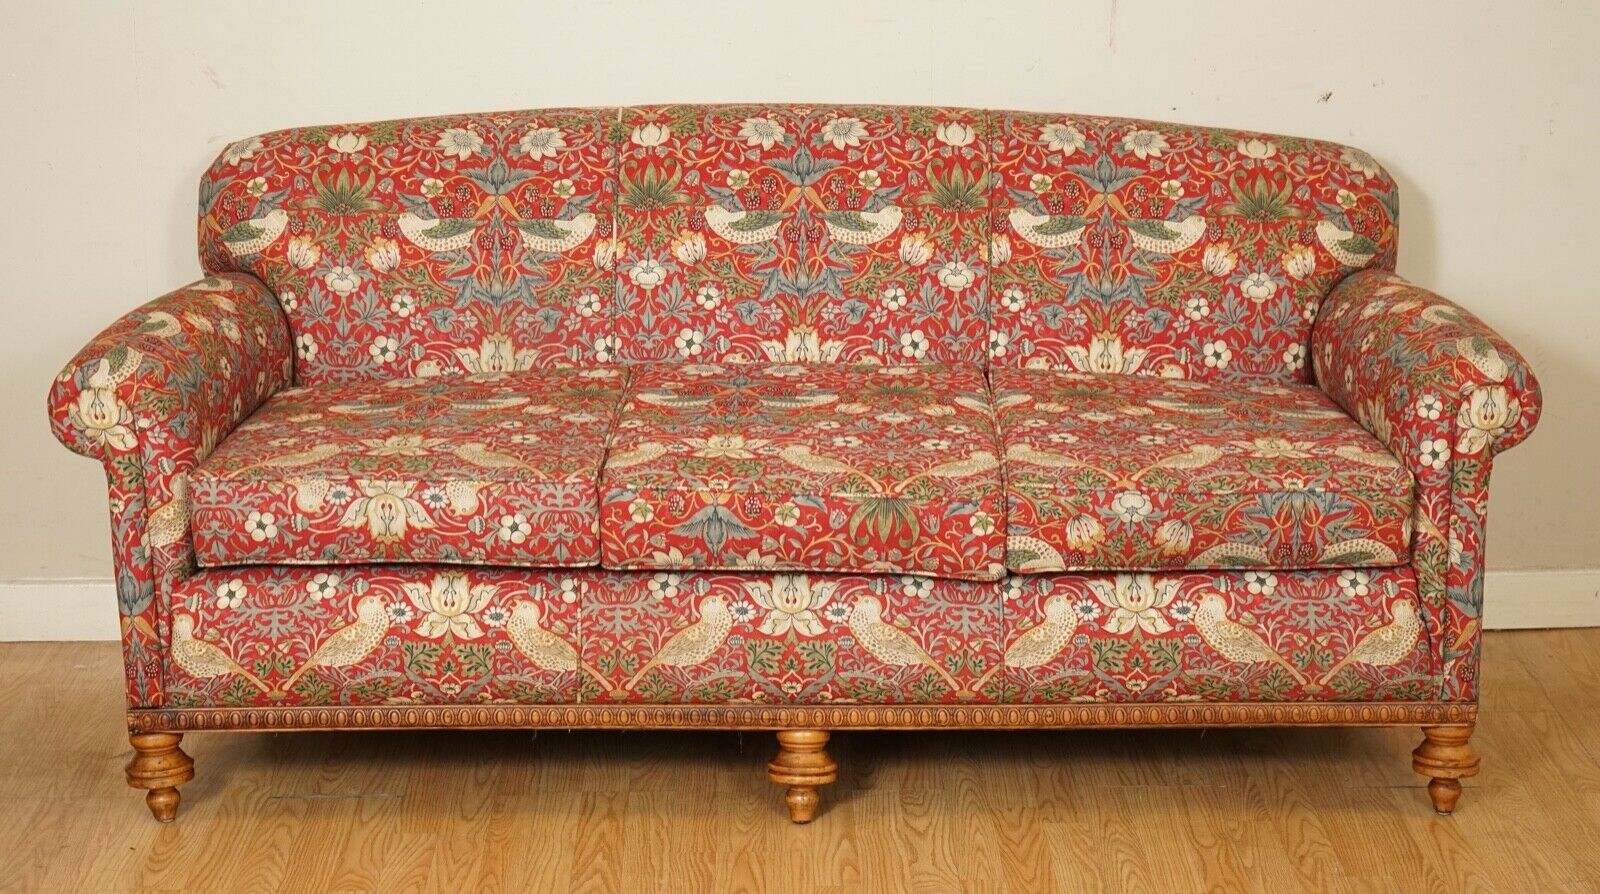 LOVELY COUNTRYHOUSE SOFA UPHOLSTERED IN WILLIAM MORRIS STRAWBERRY THIEF FABRIC